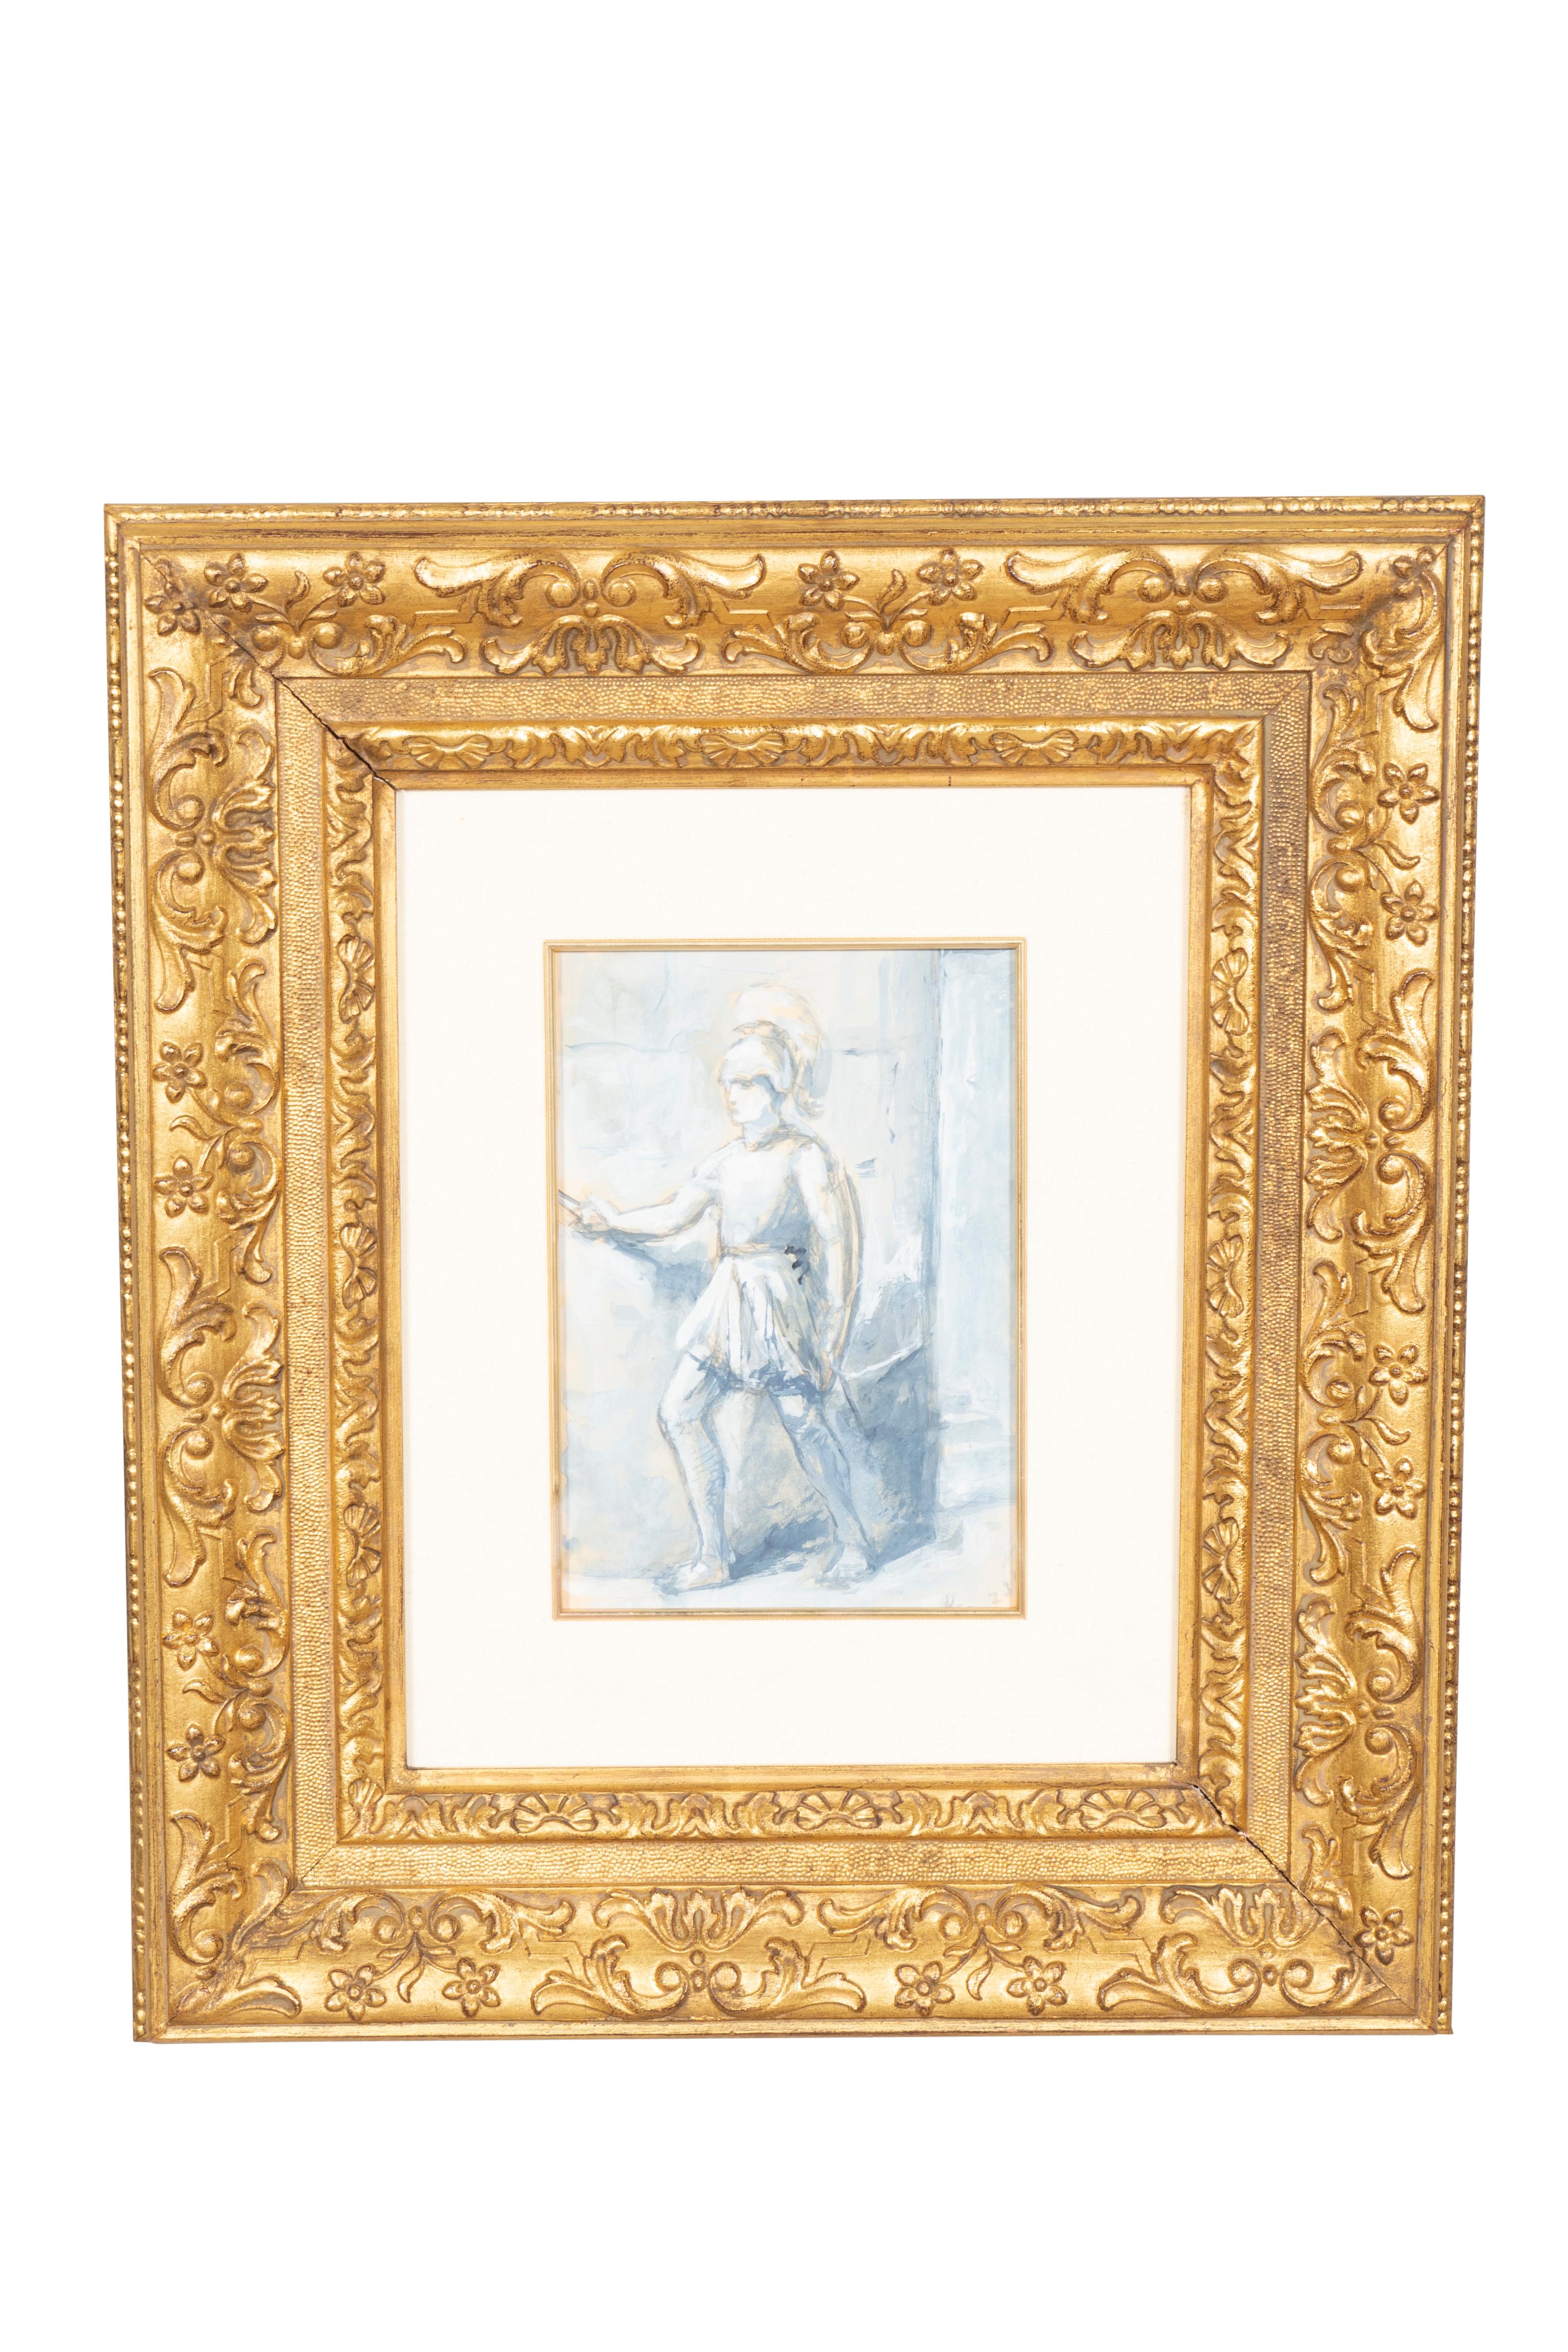 Two Framed Gouaches By Dewitt McClellan Lockman In Good Condition For Sale In Essex, MA